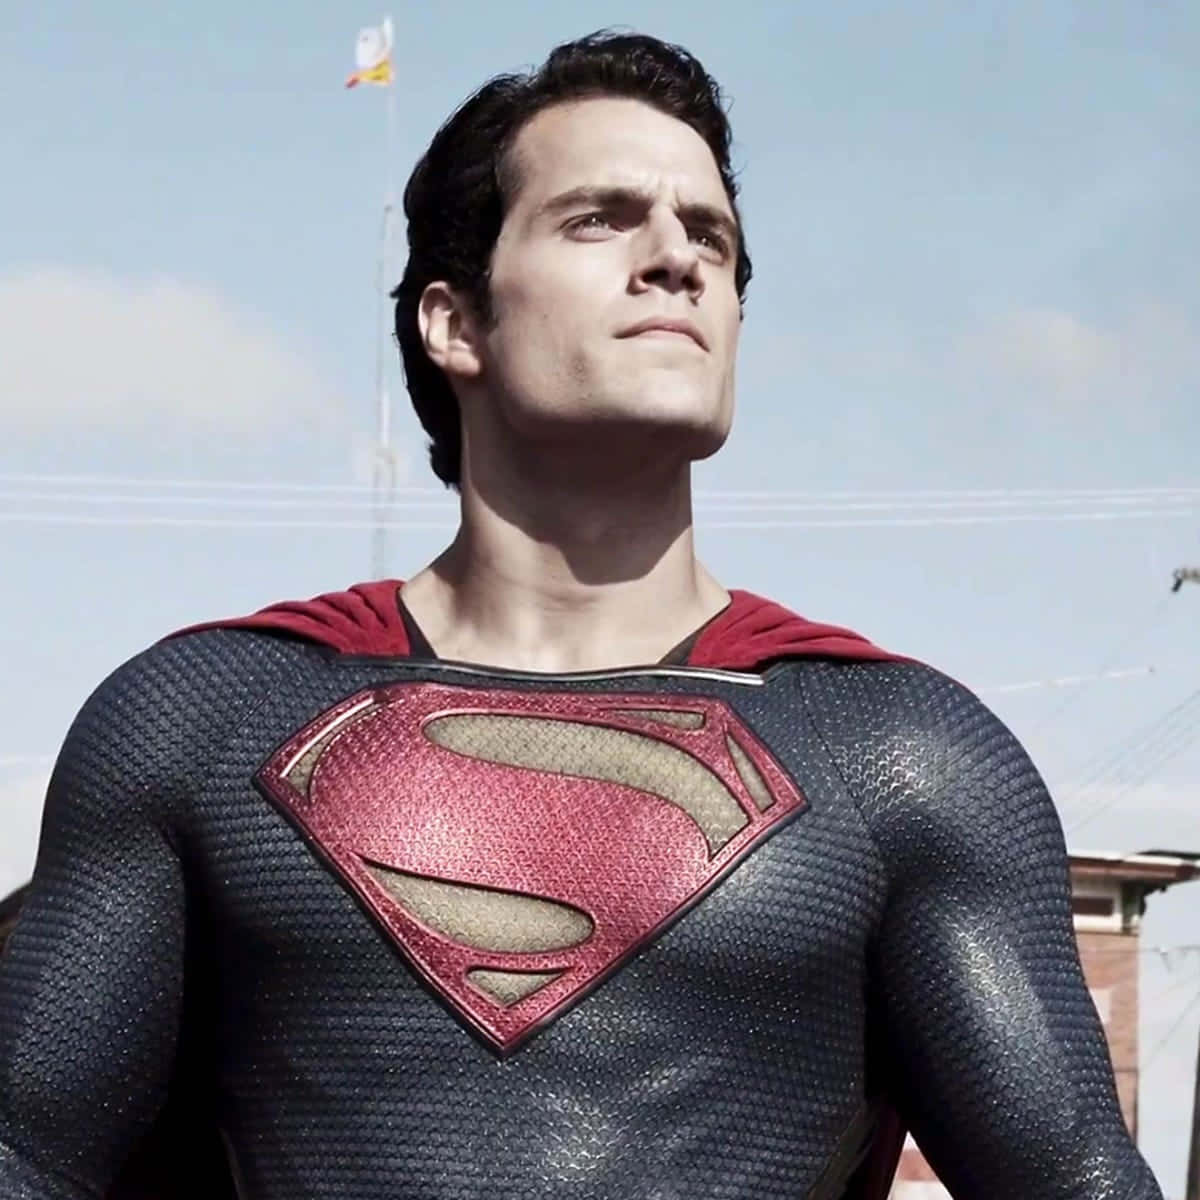 Superman is an iconic superhero, ready to defend humanity from evil